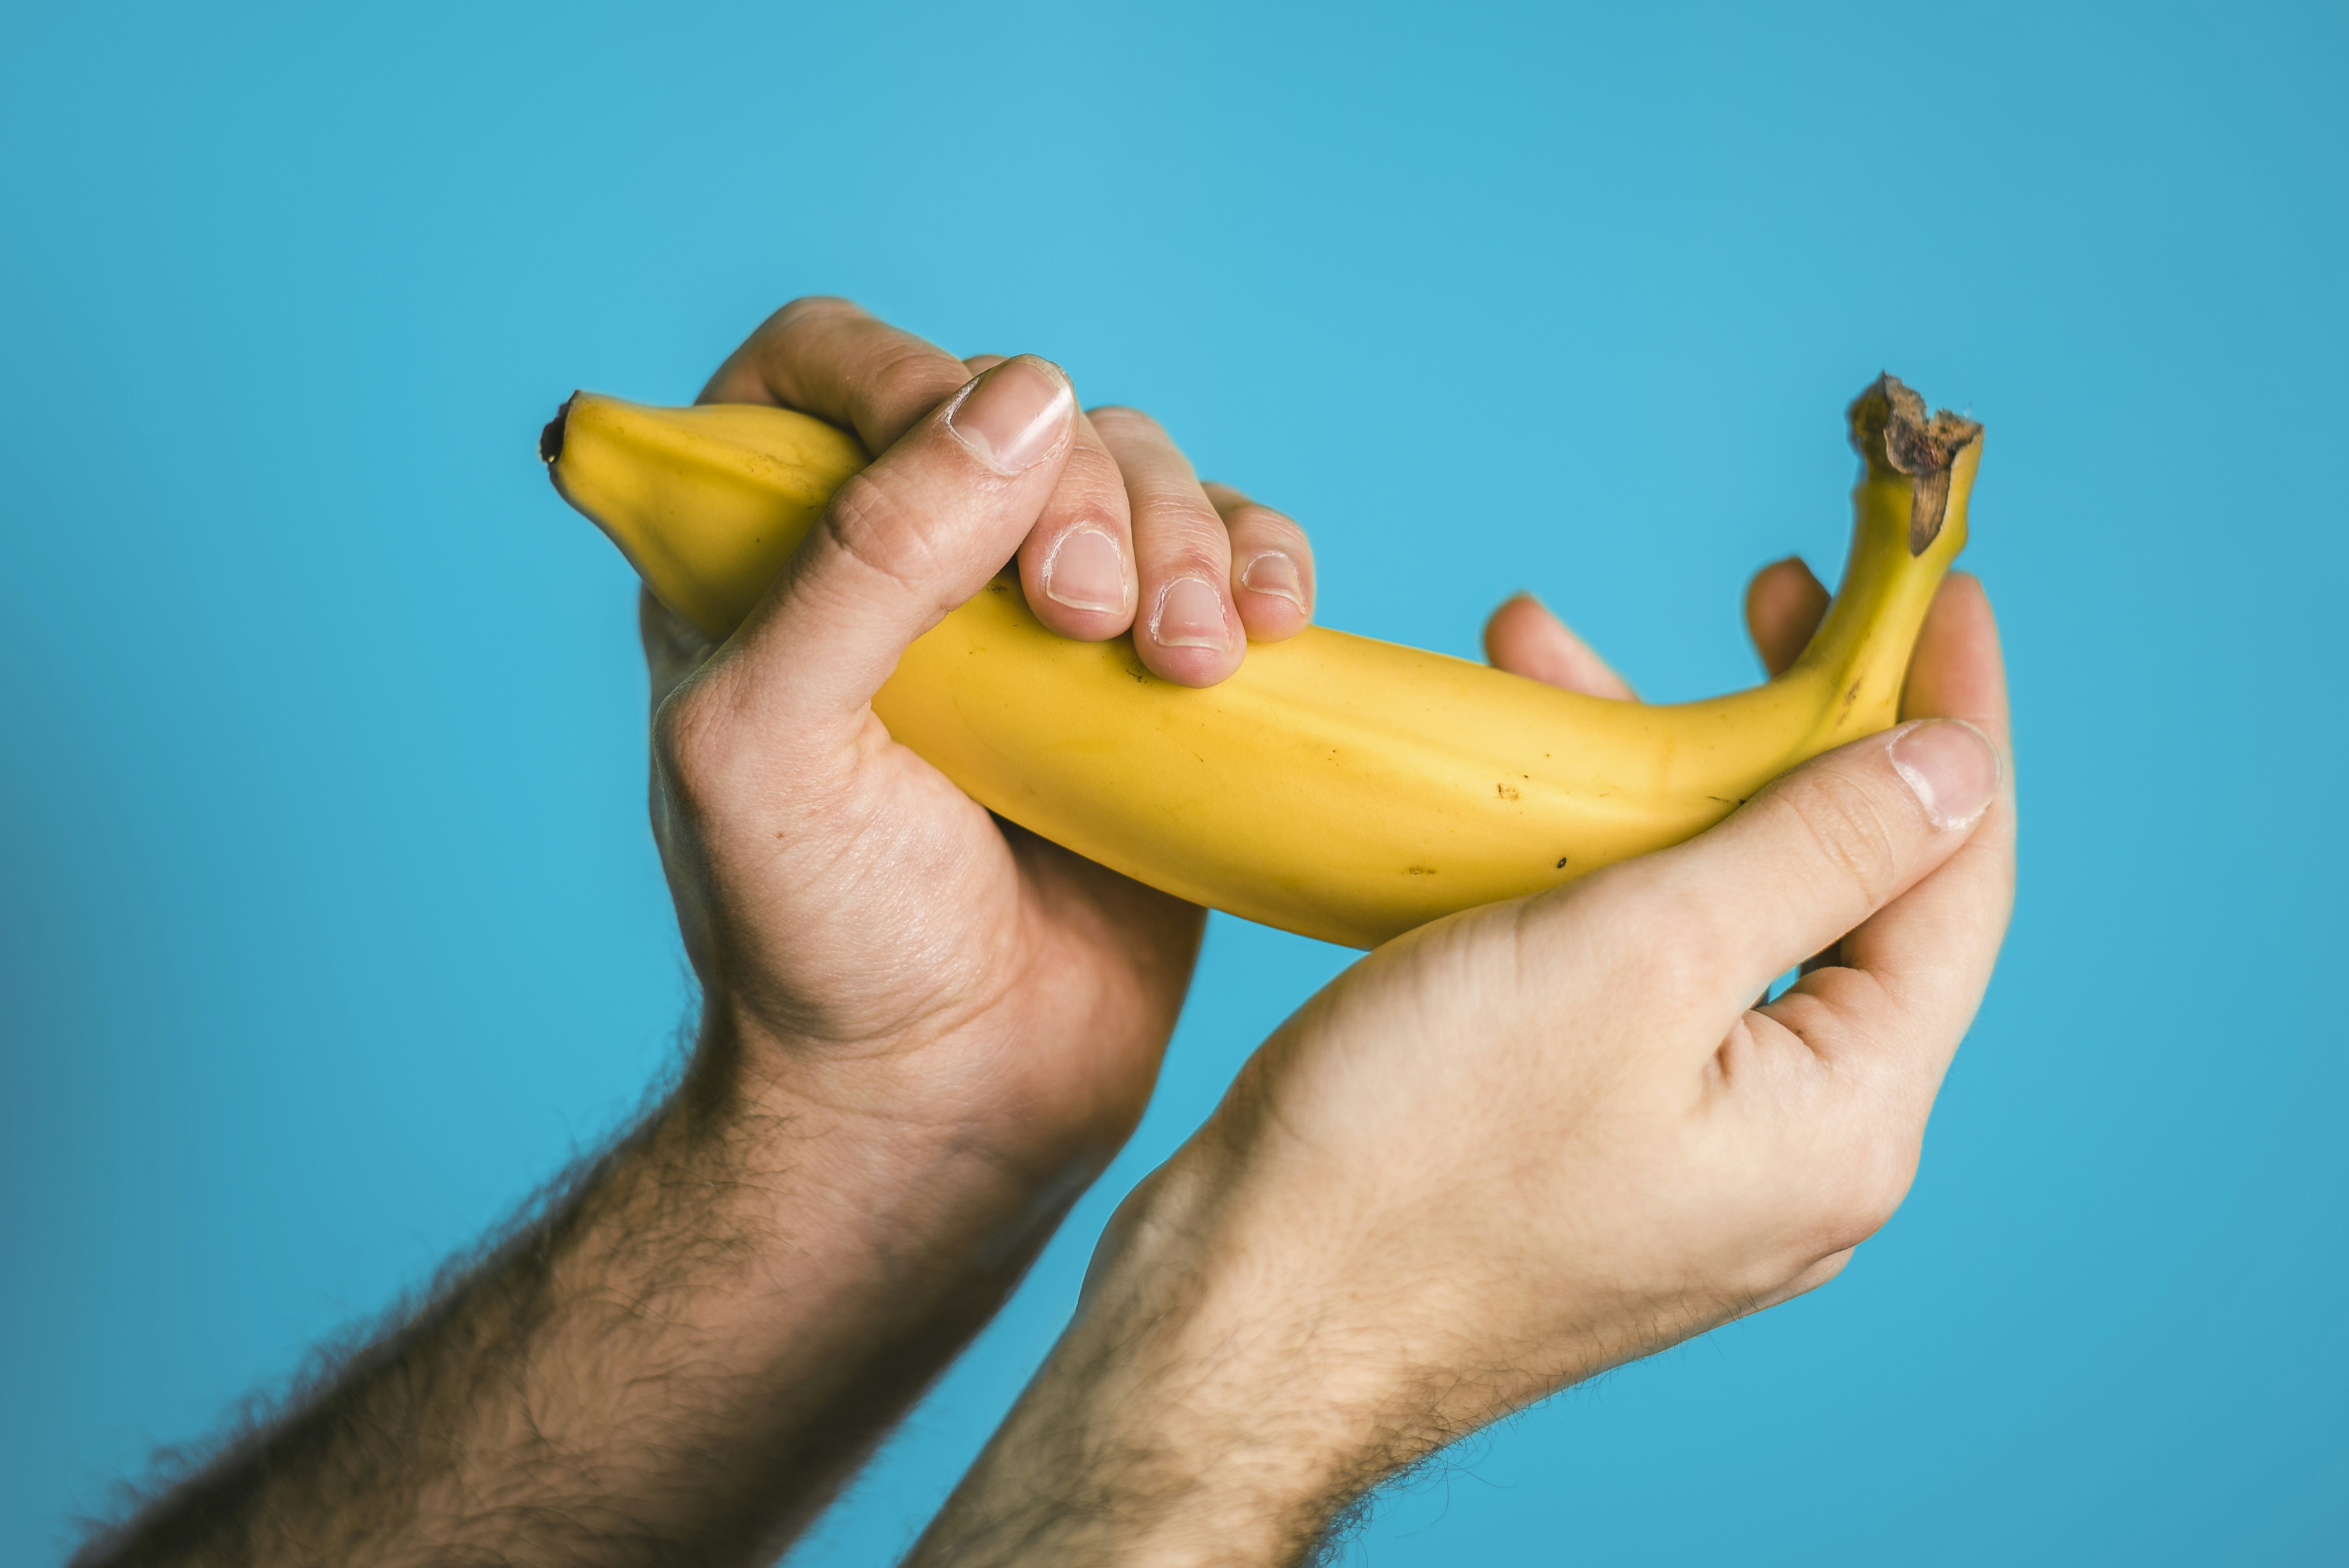 amy gavin recommends How To Masterbate With A Bannana